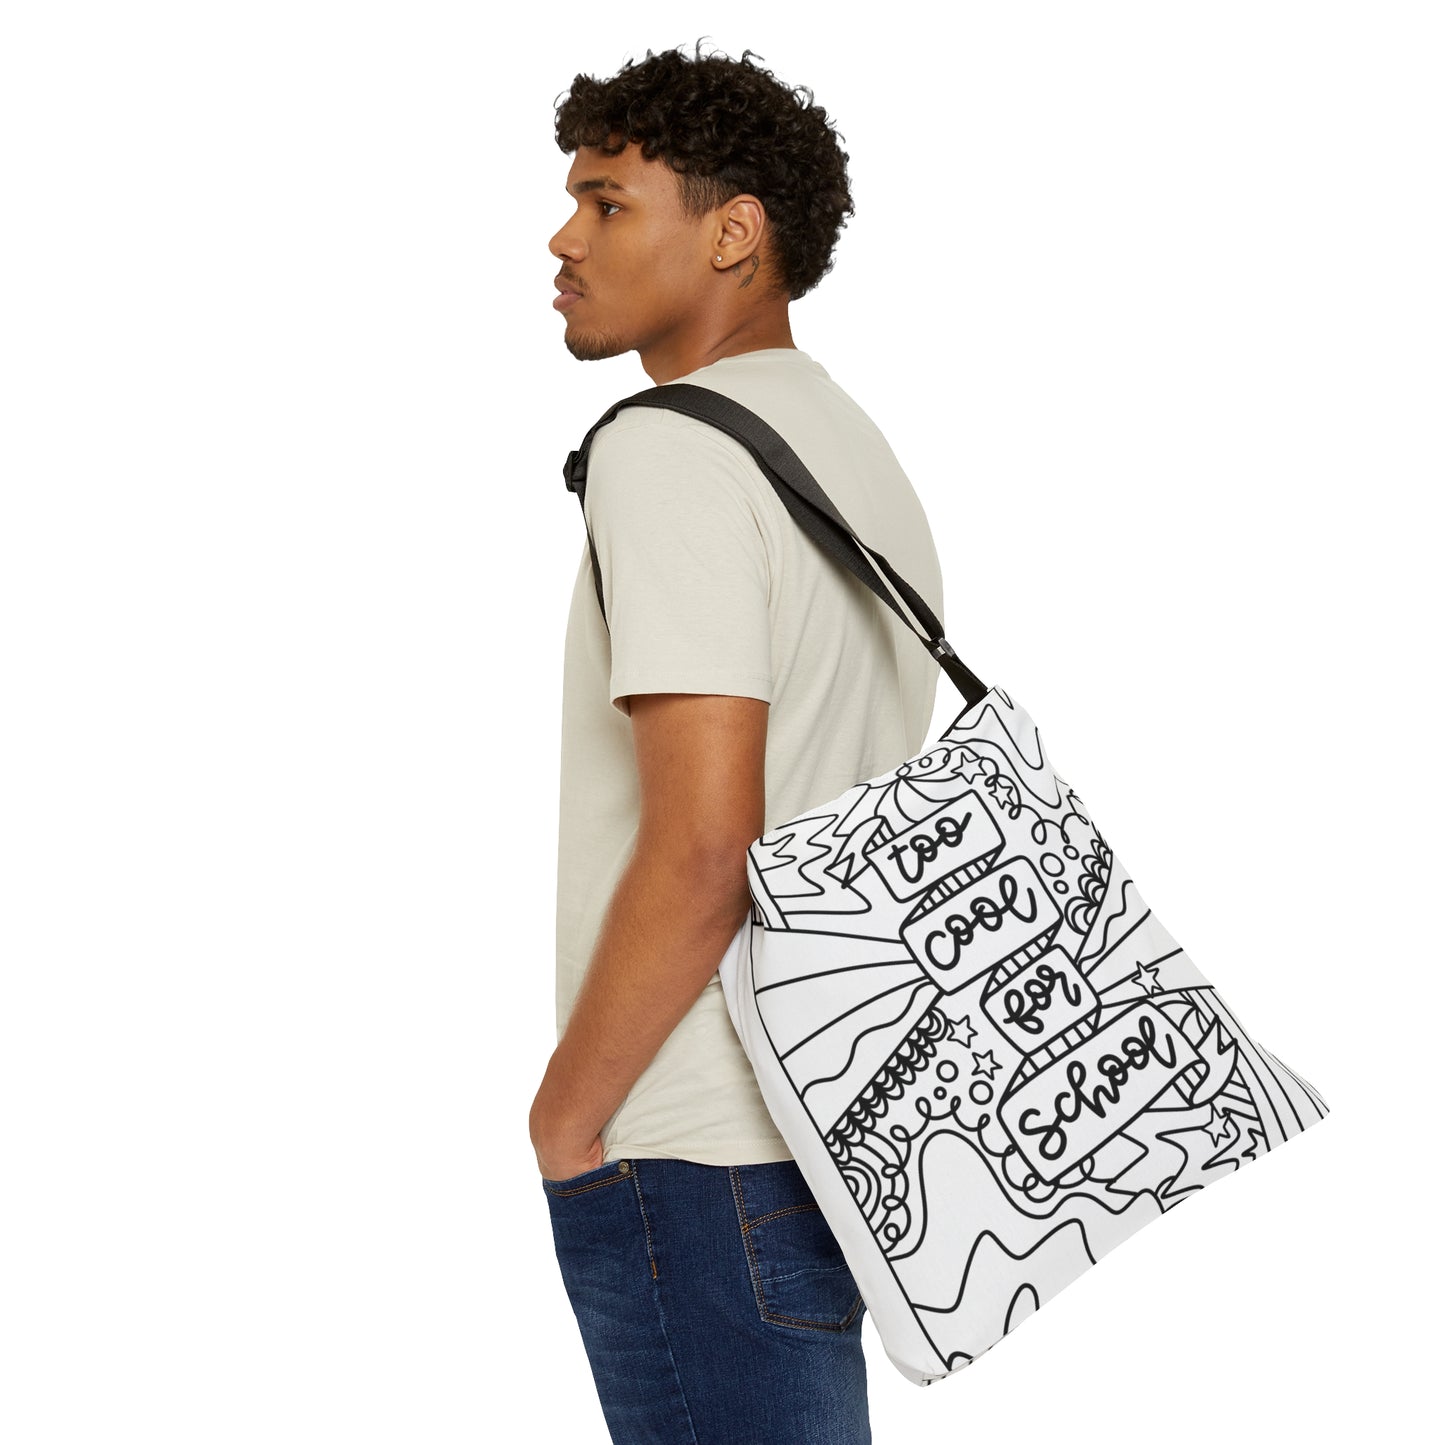 "Too Cool For School" Black & White Adjustable Tote Bag